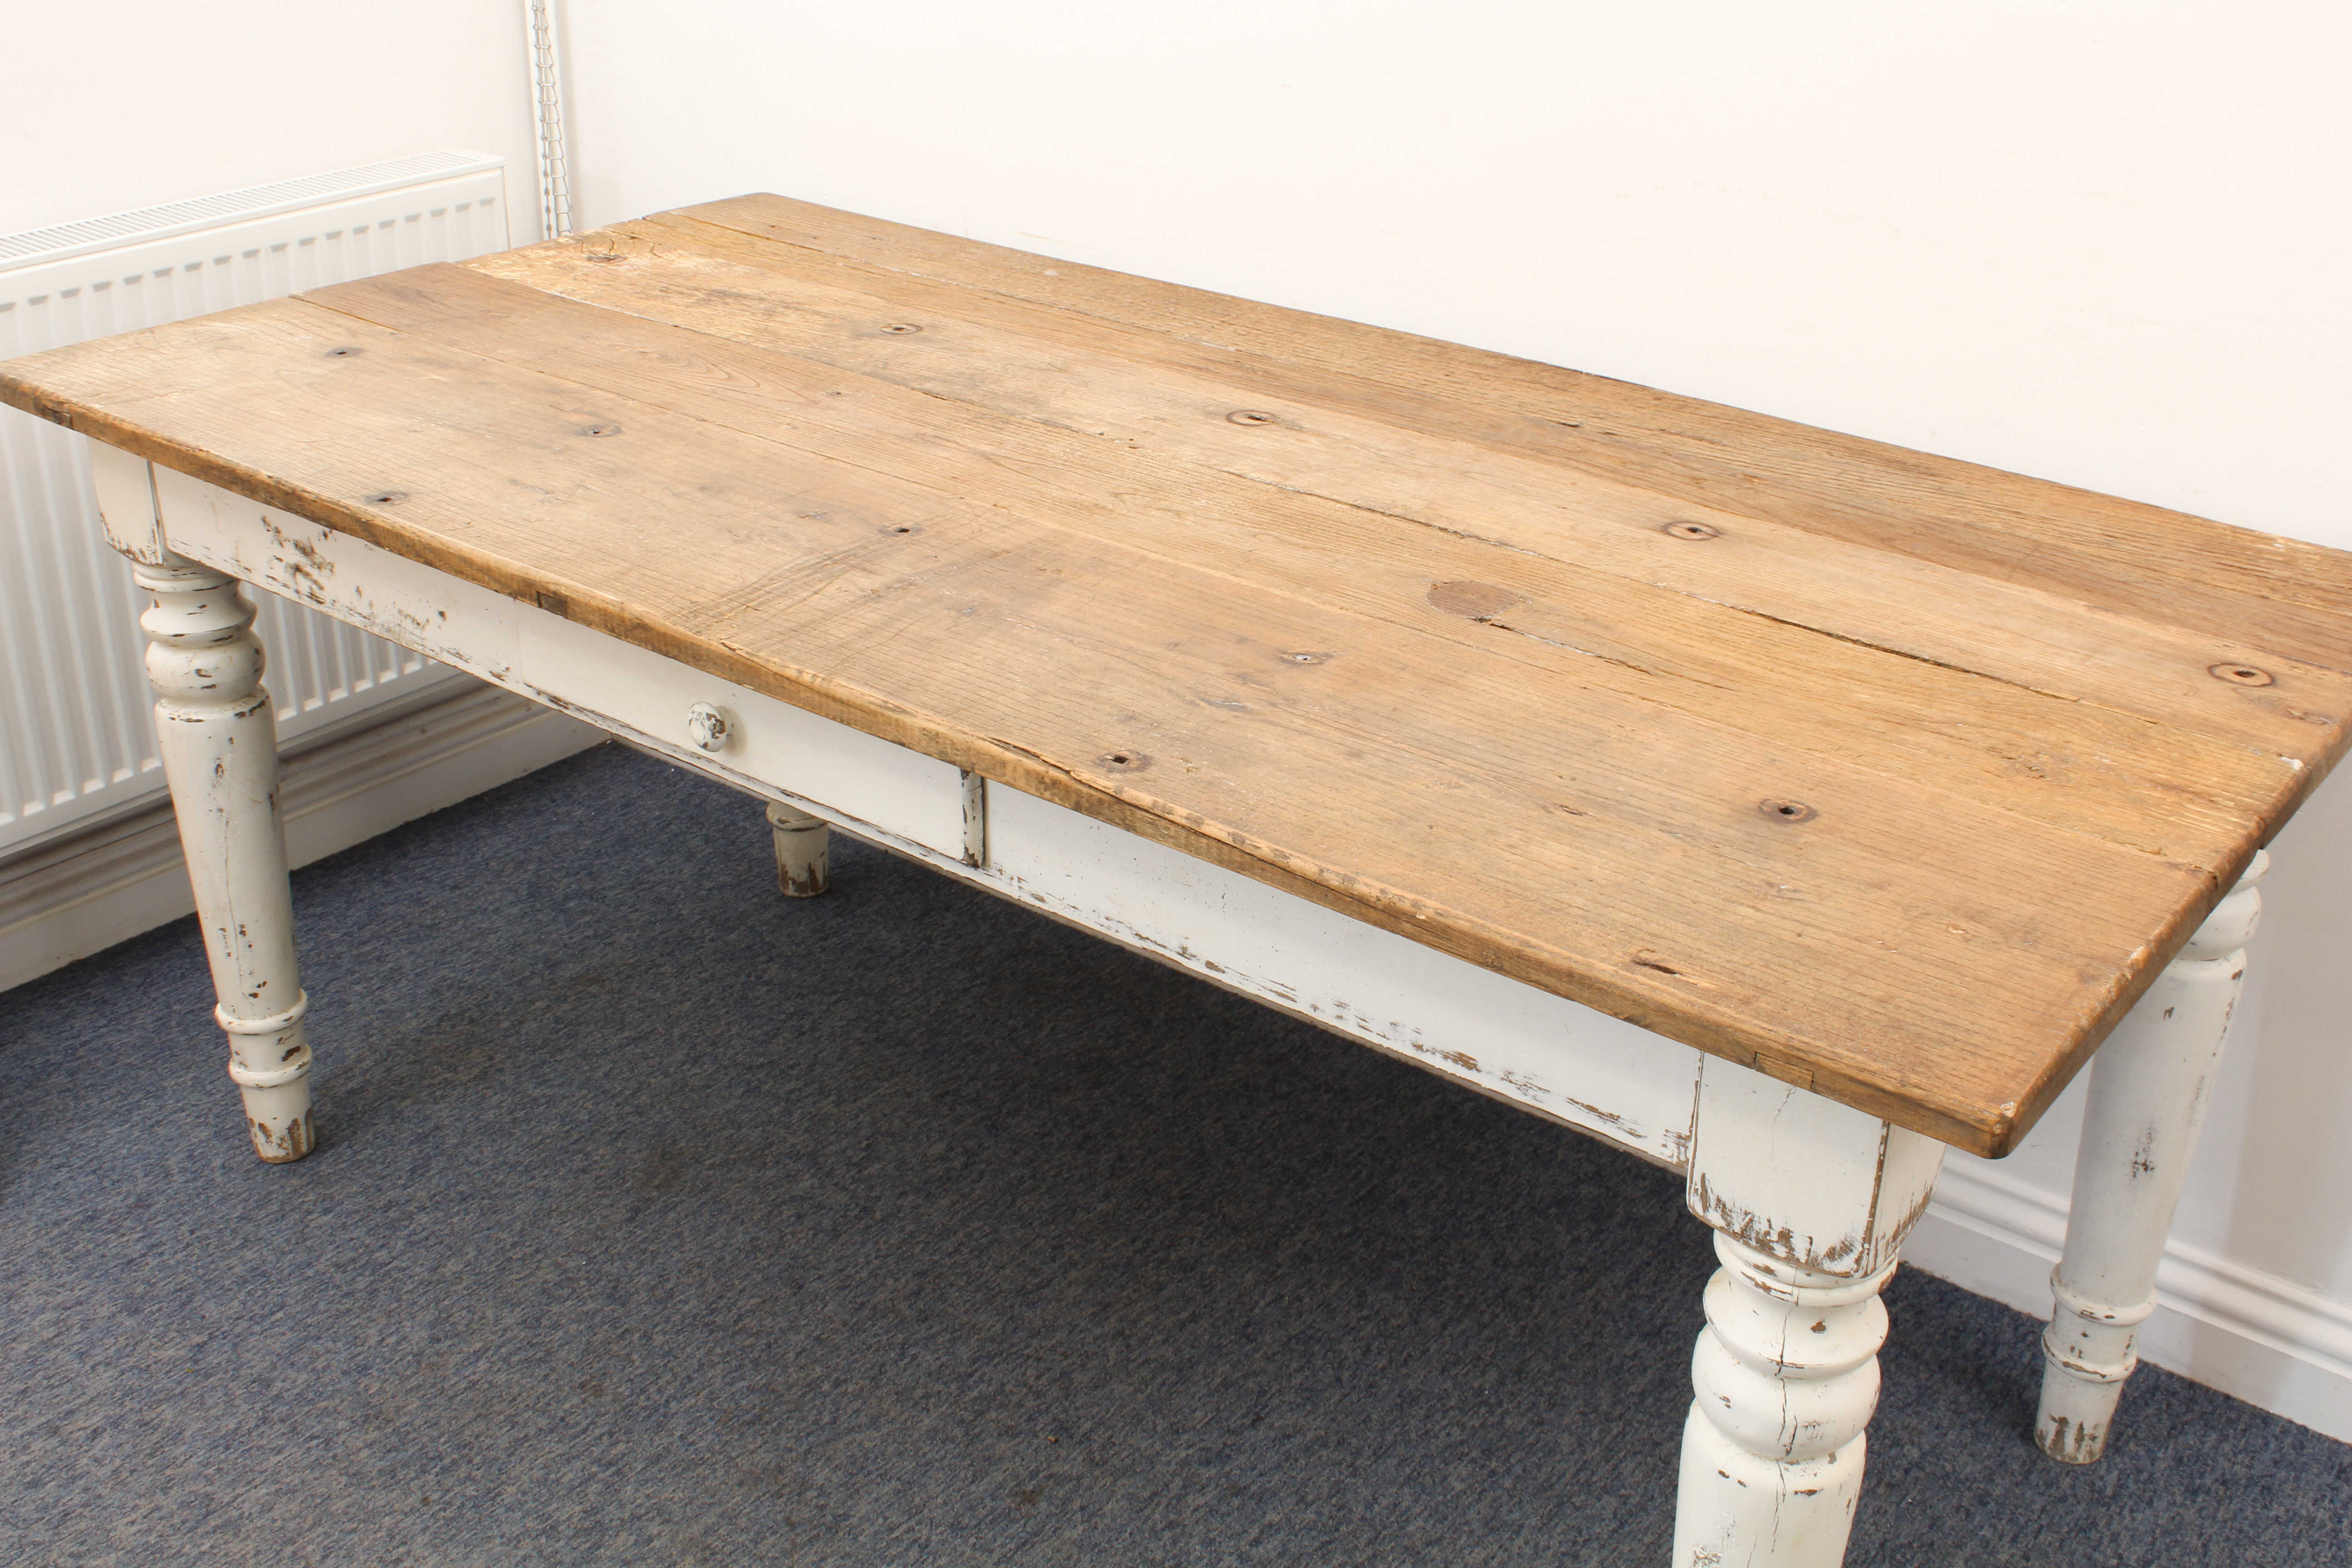 An oak farmhouse kitchen dining table in 19th century style - the rustic, planked top raised on an - Image 3 of 7